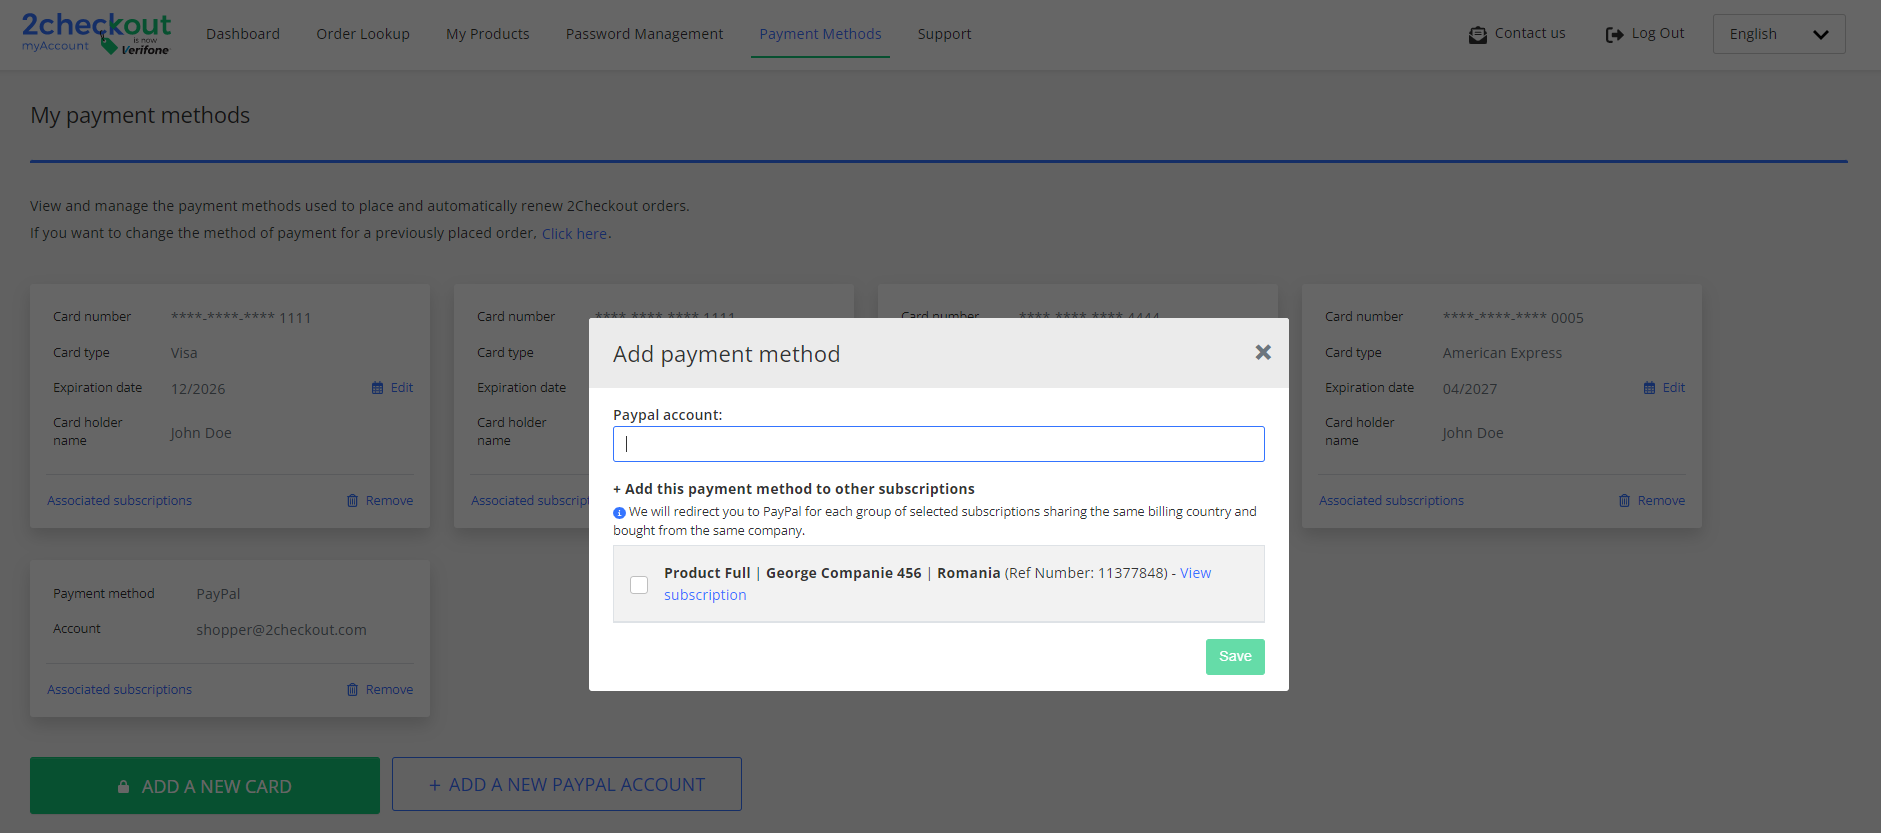 Payment methods - Add a PayPal account modal.